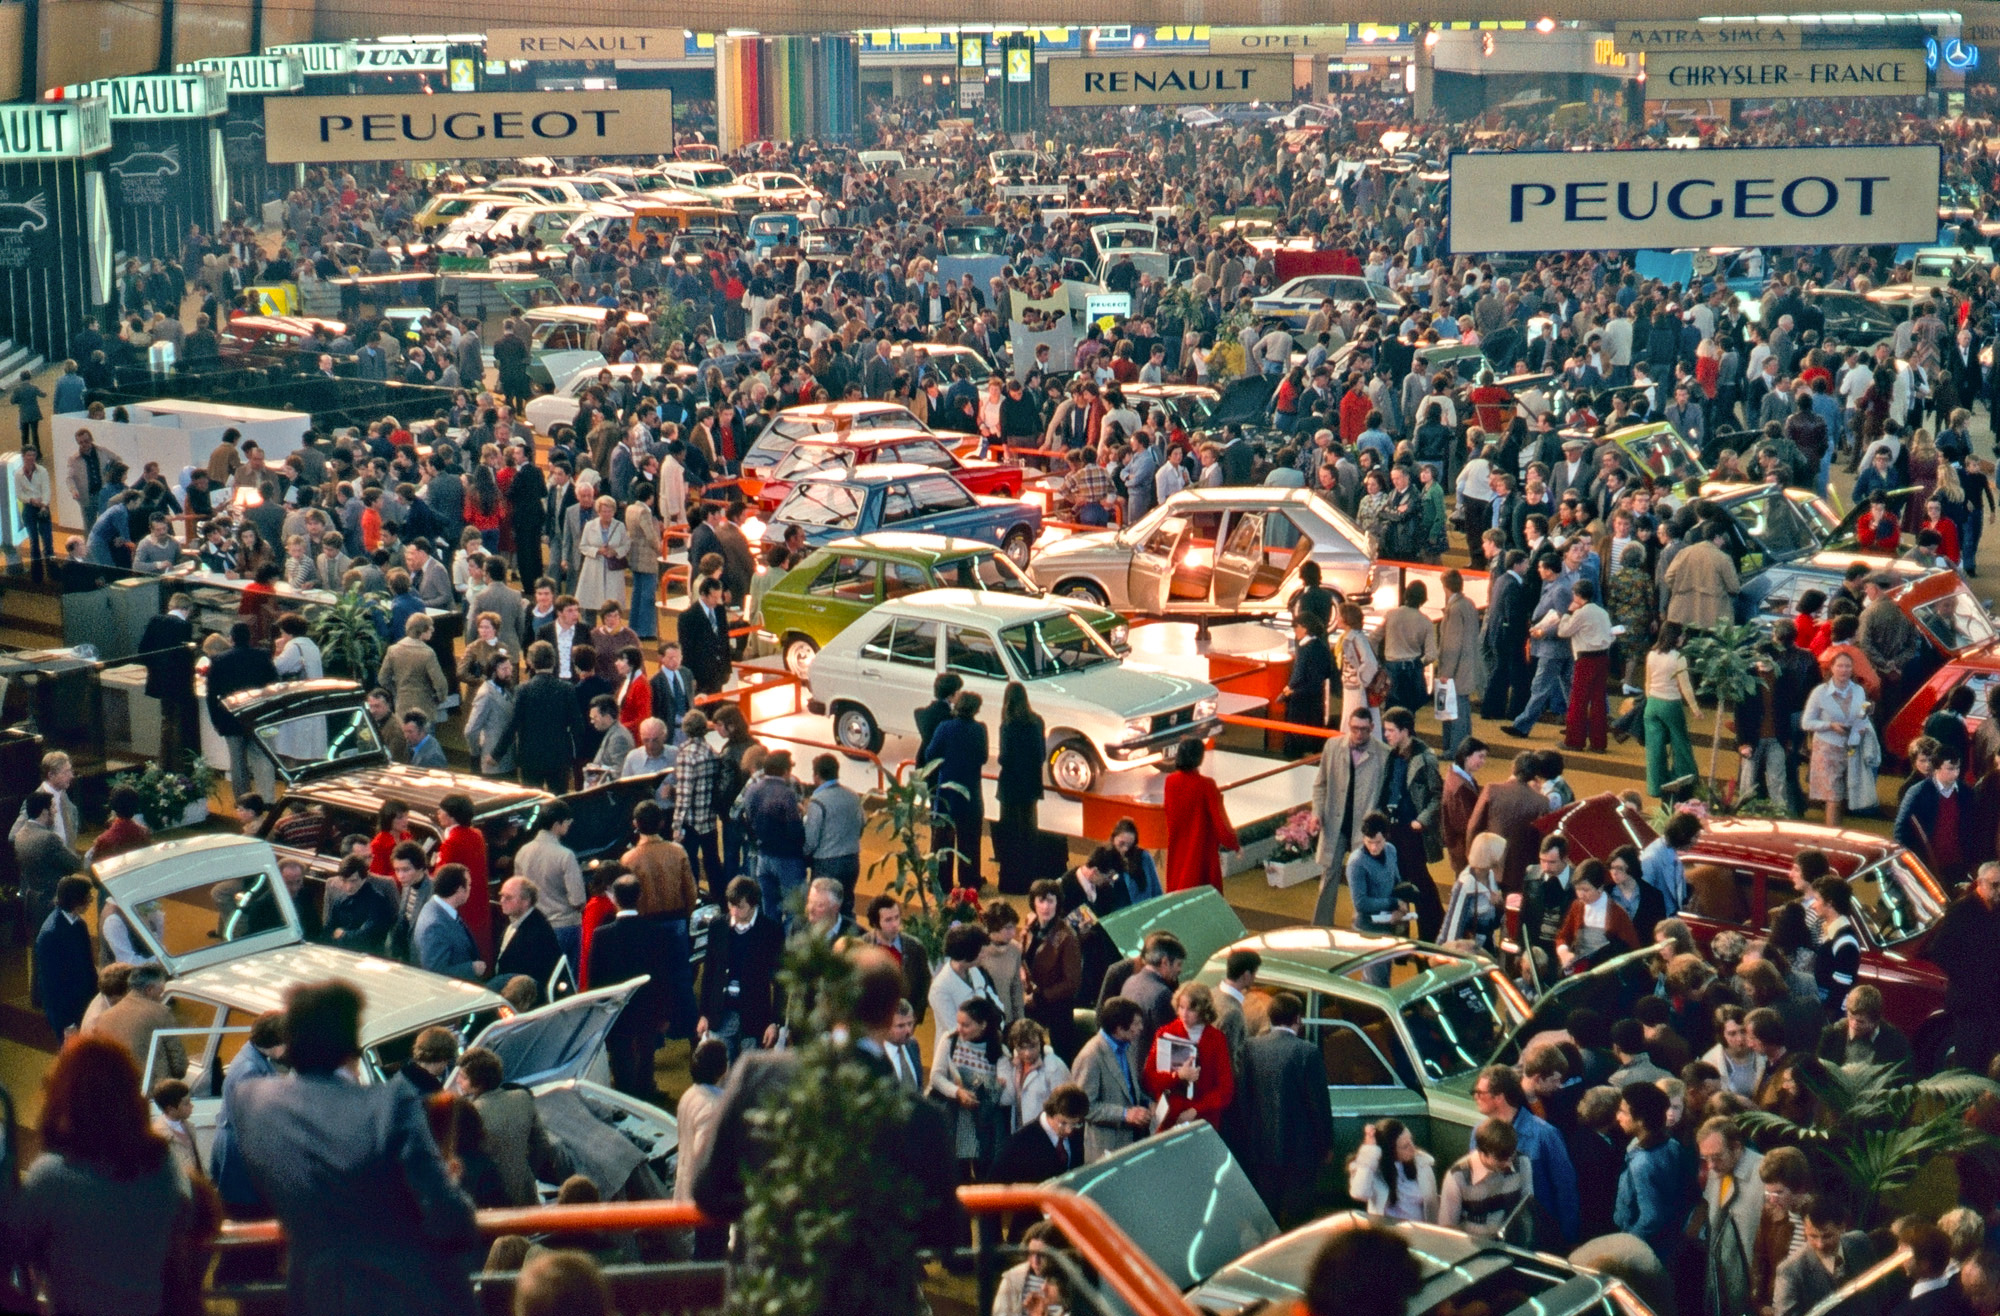 October, 1976: I was with friends on a trip to England and France when we popped into the 63rd Paris Motor Show, or as it was known then Le Salon de l'Automobile, where I took this Kodachrome slide. Très chic. View full size.